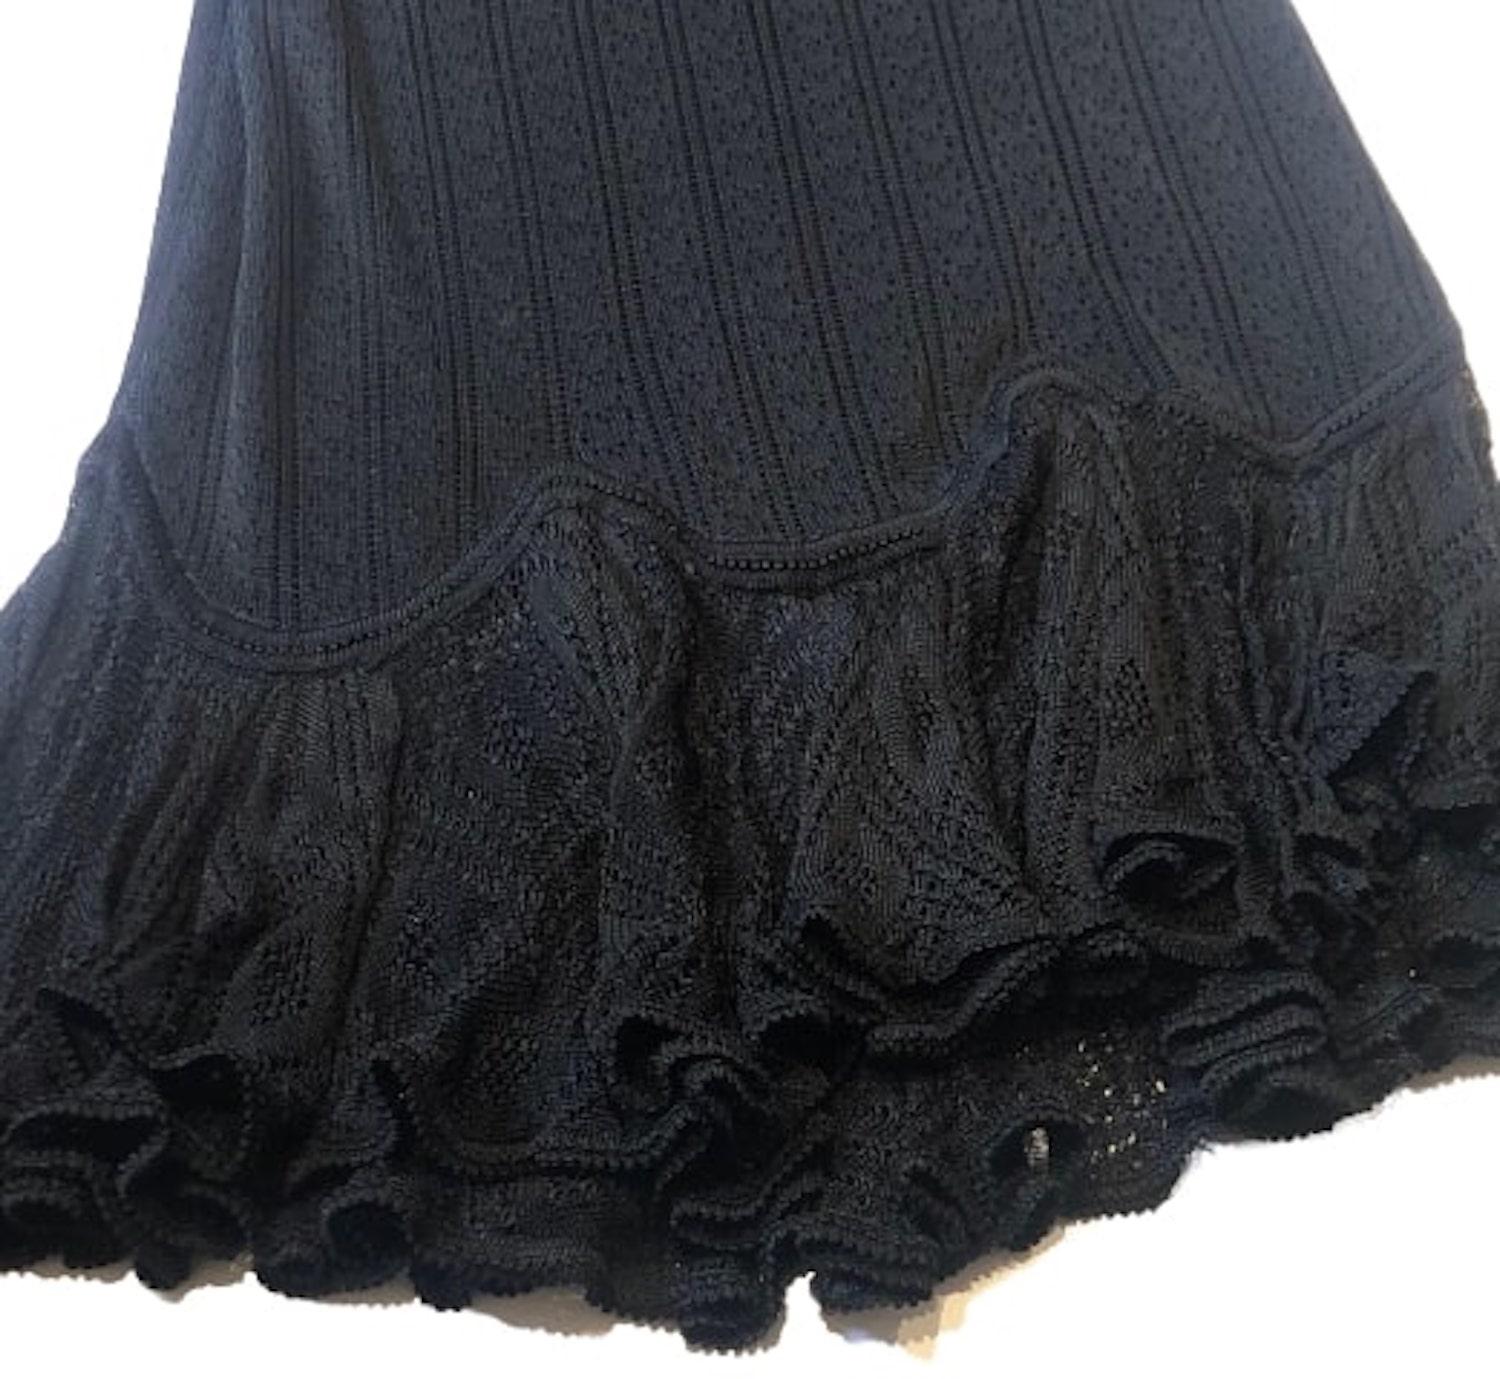 Women's JOHN GALLIANO Black Knitted Lace Evening Mid Length Dress C.1998 For Sale